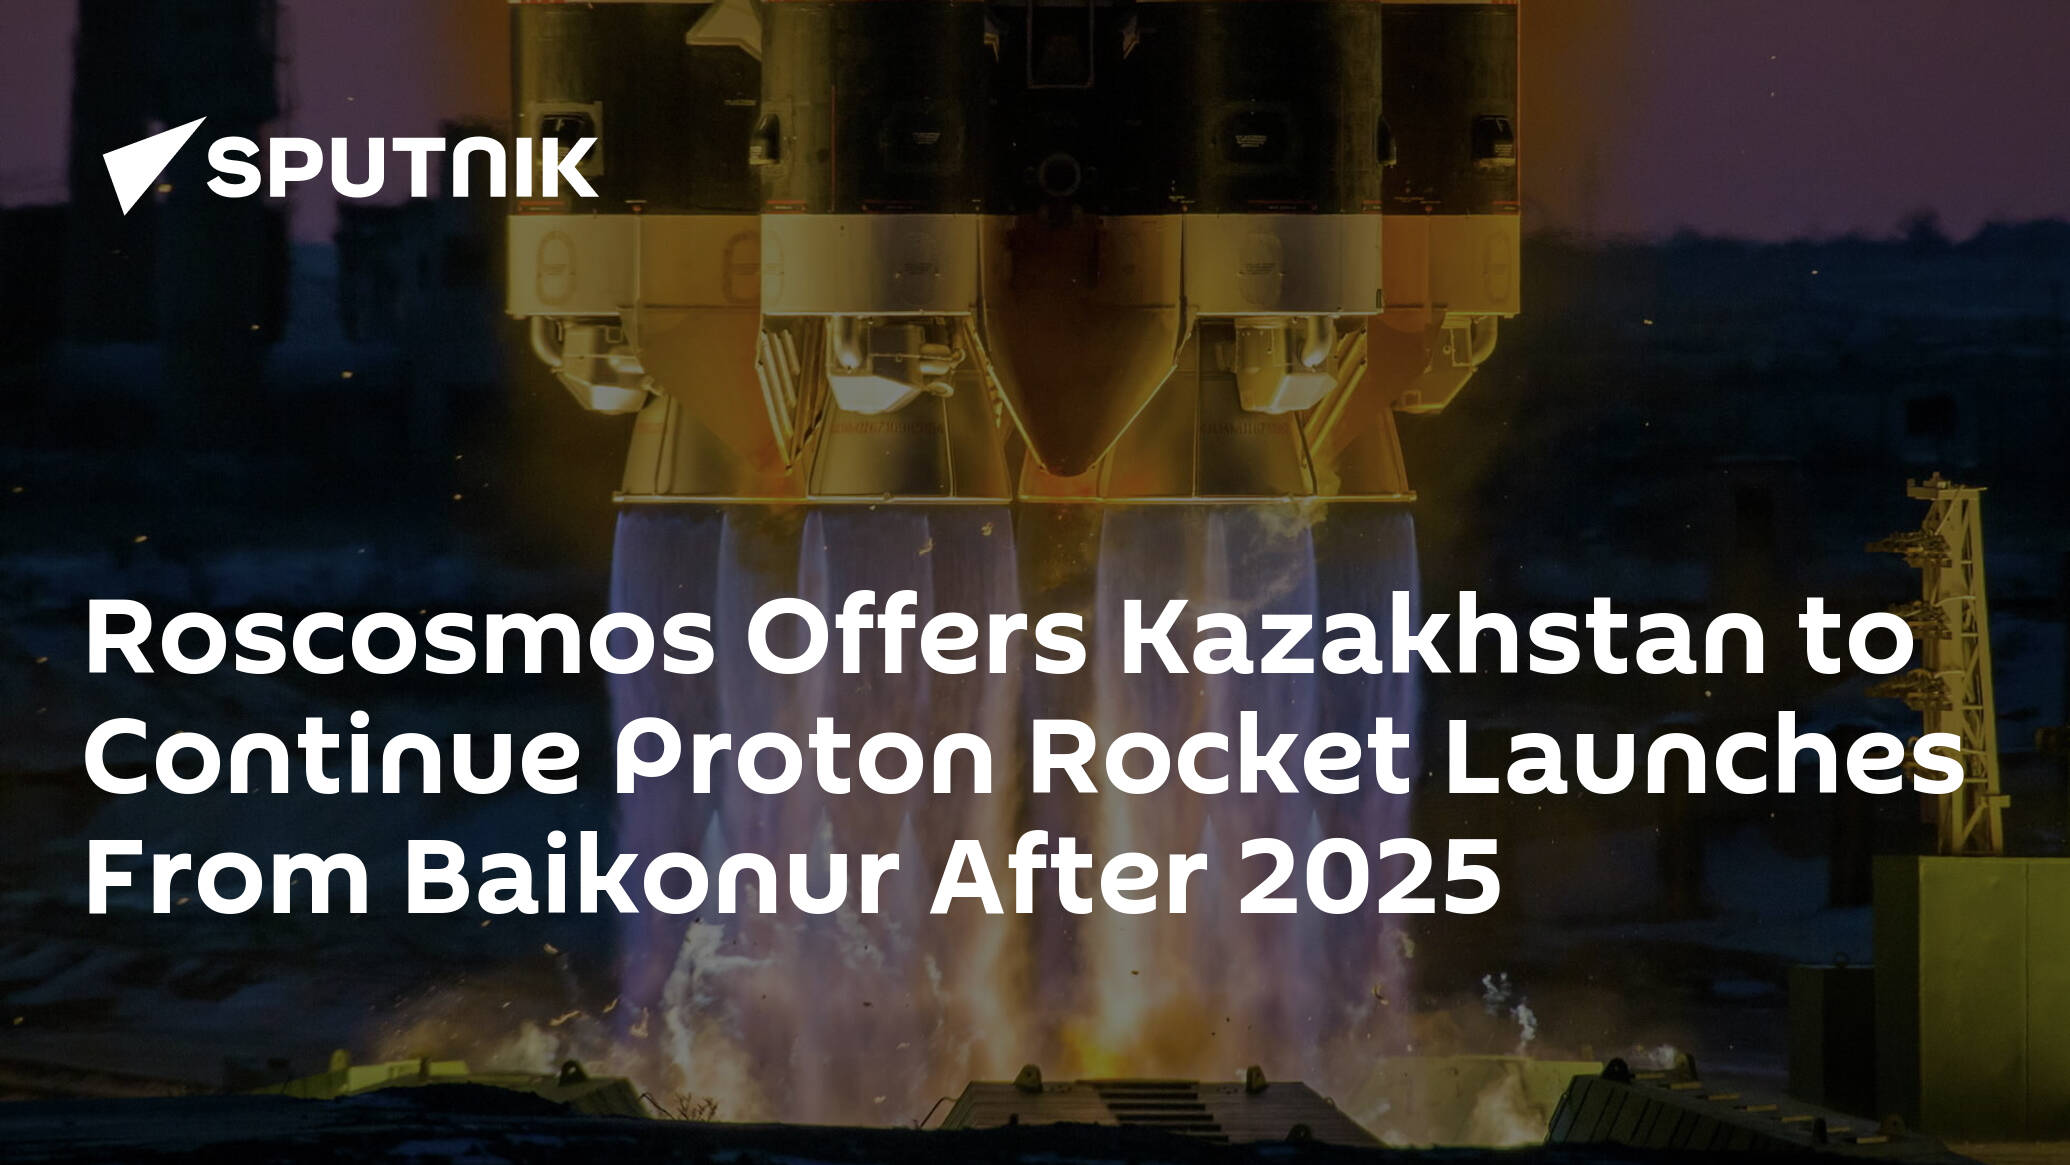 Roscosmos Offers Kazakhstan to Continue Proton Rocket Launches From Baikonur After 2025